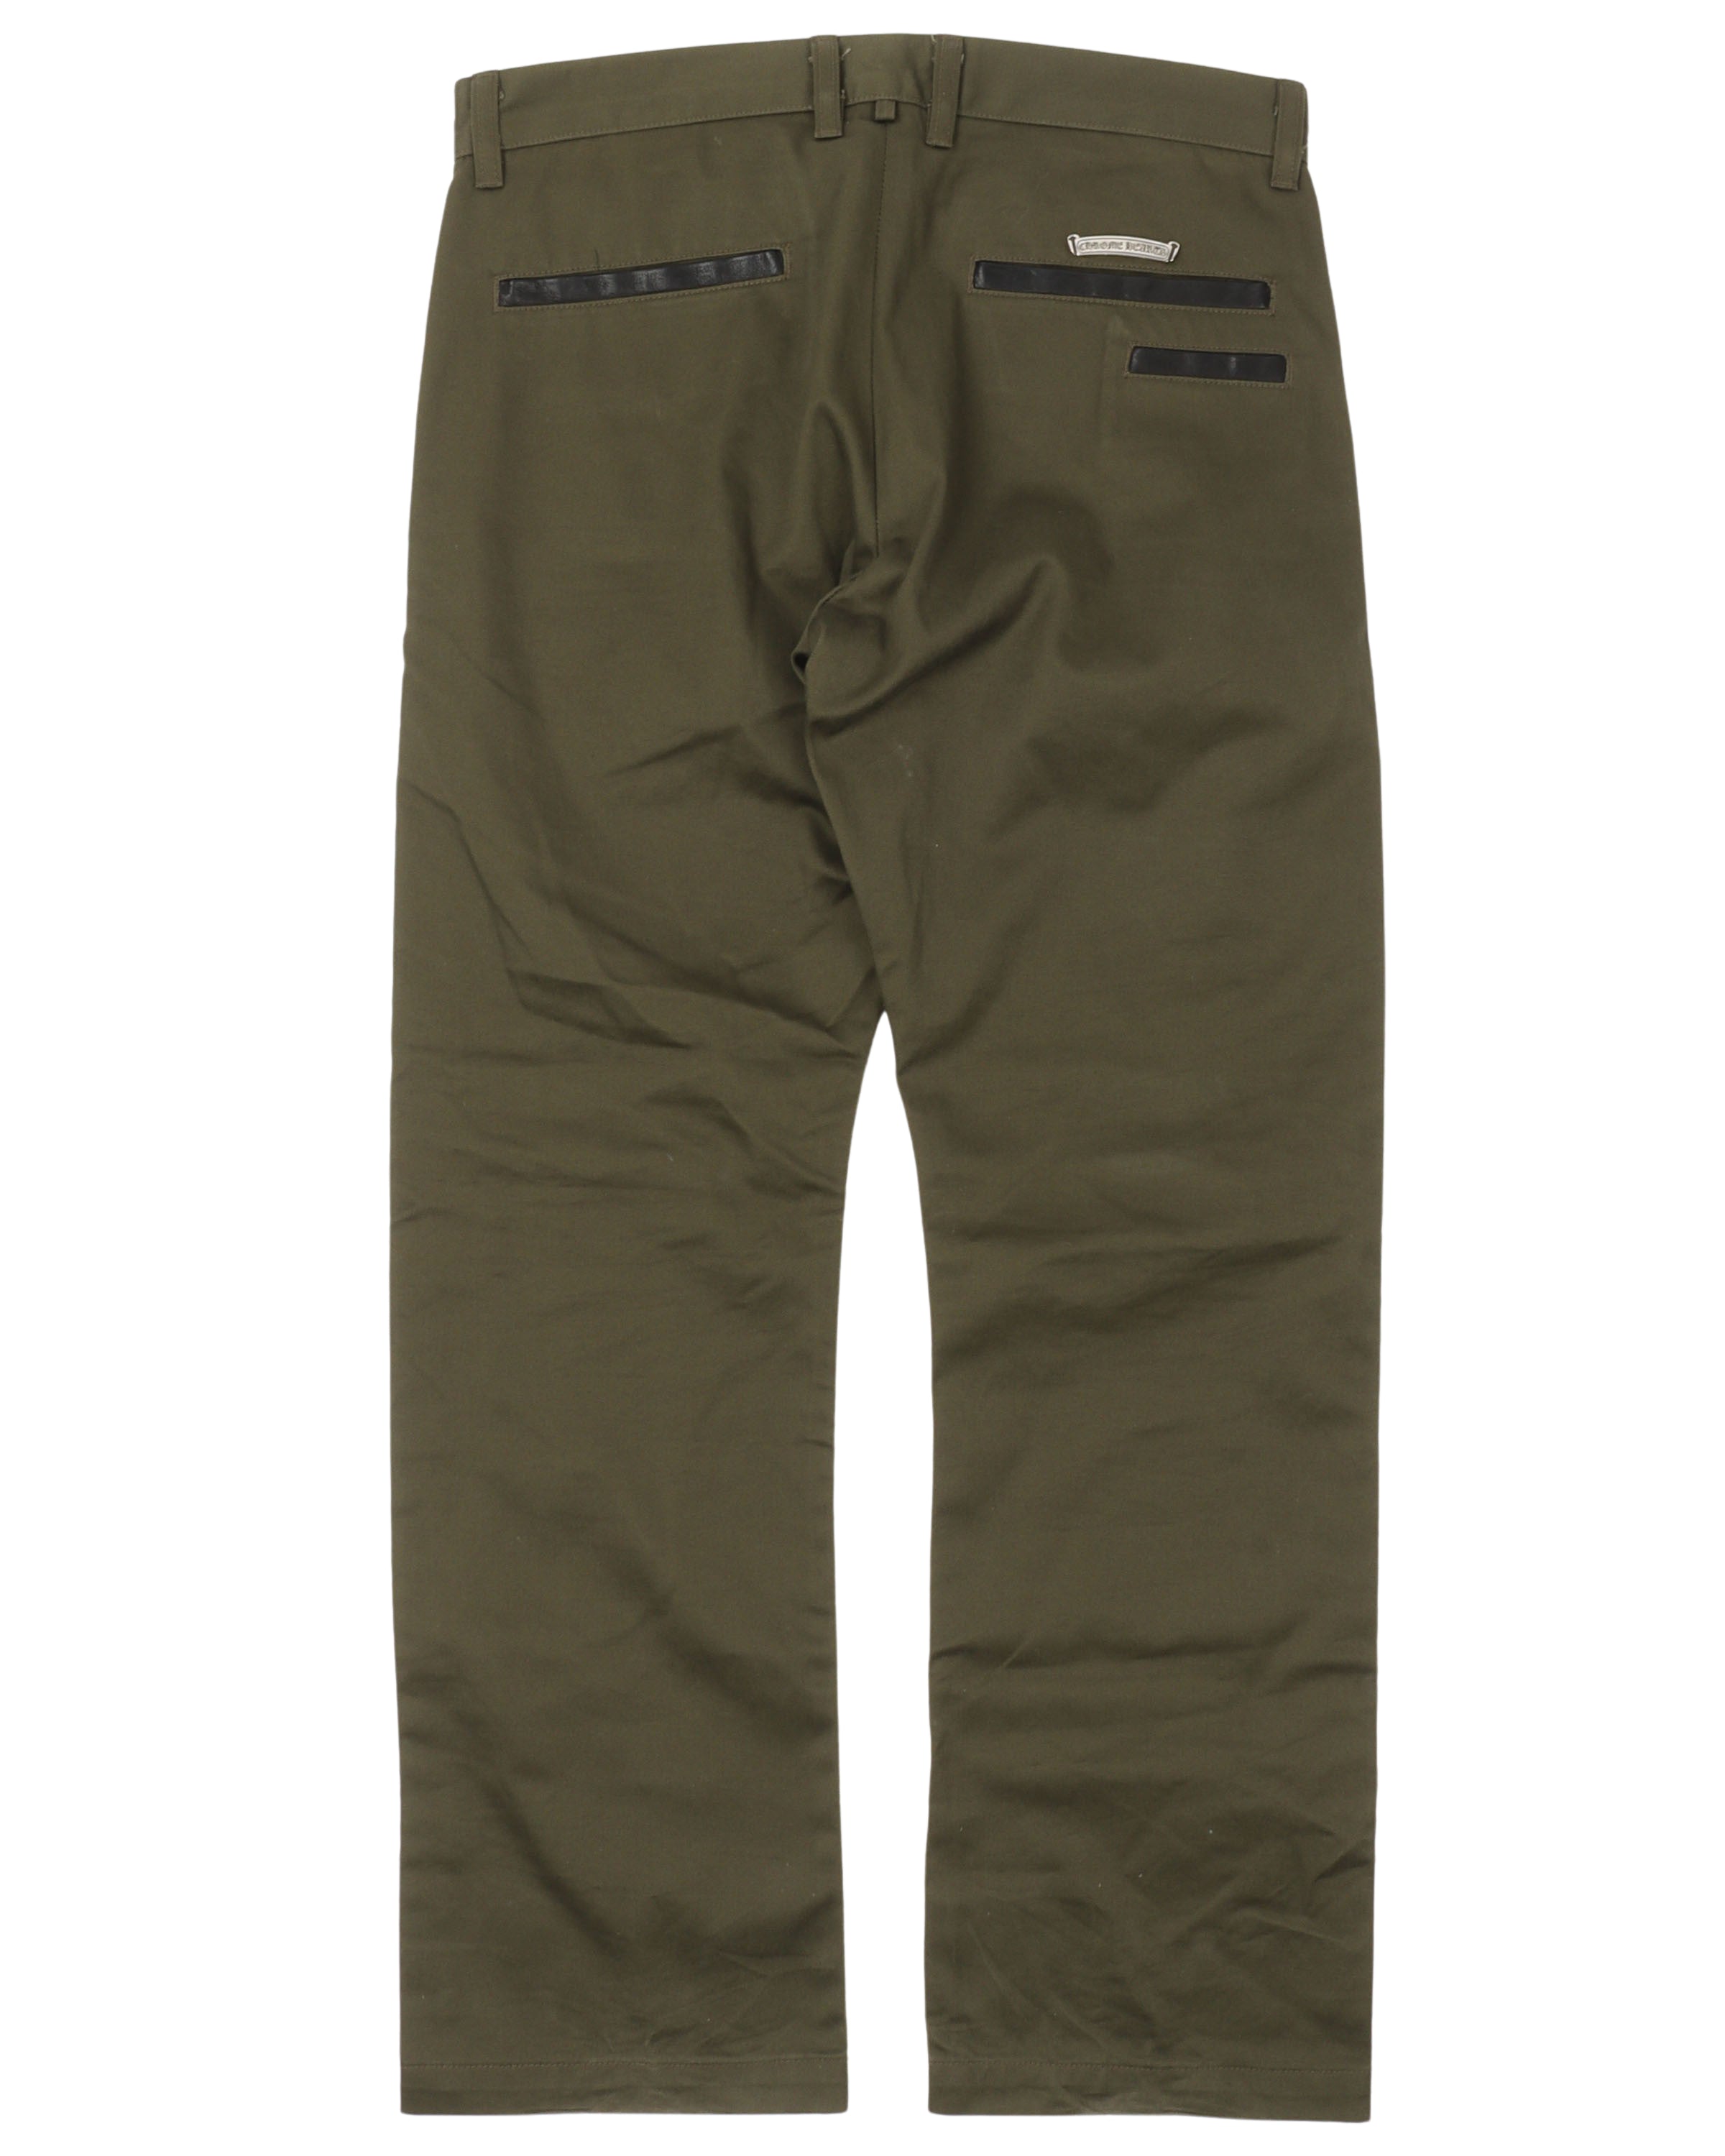 Leather Cross Patch Chino Pants